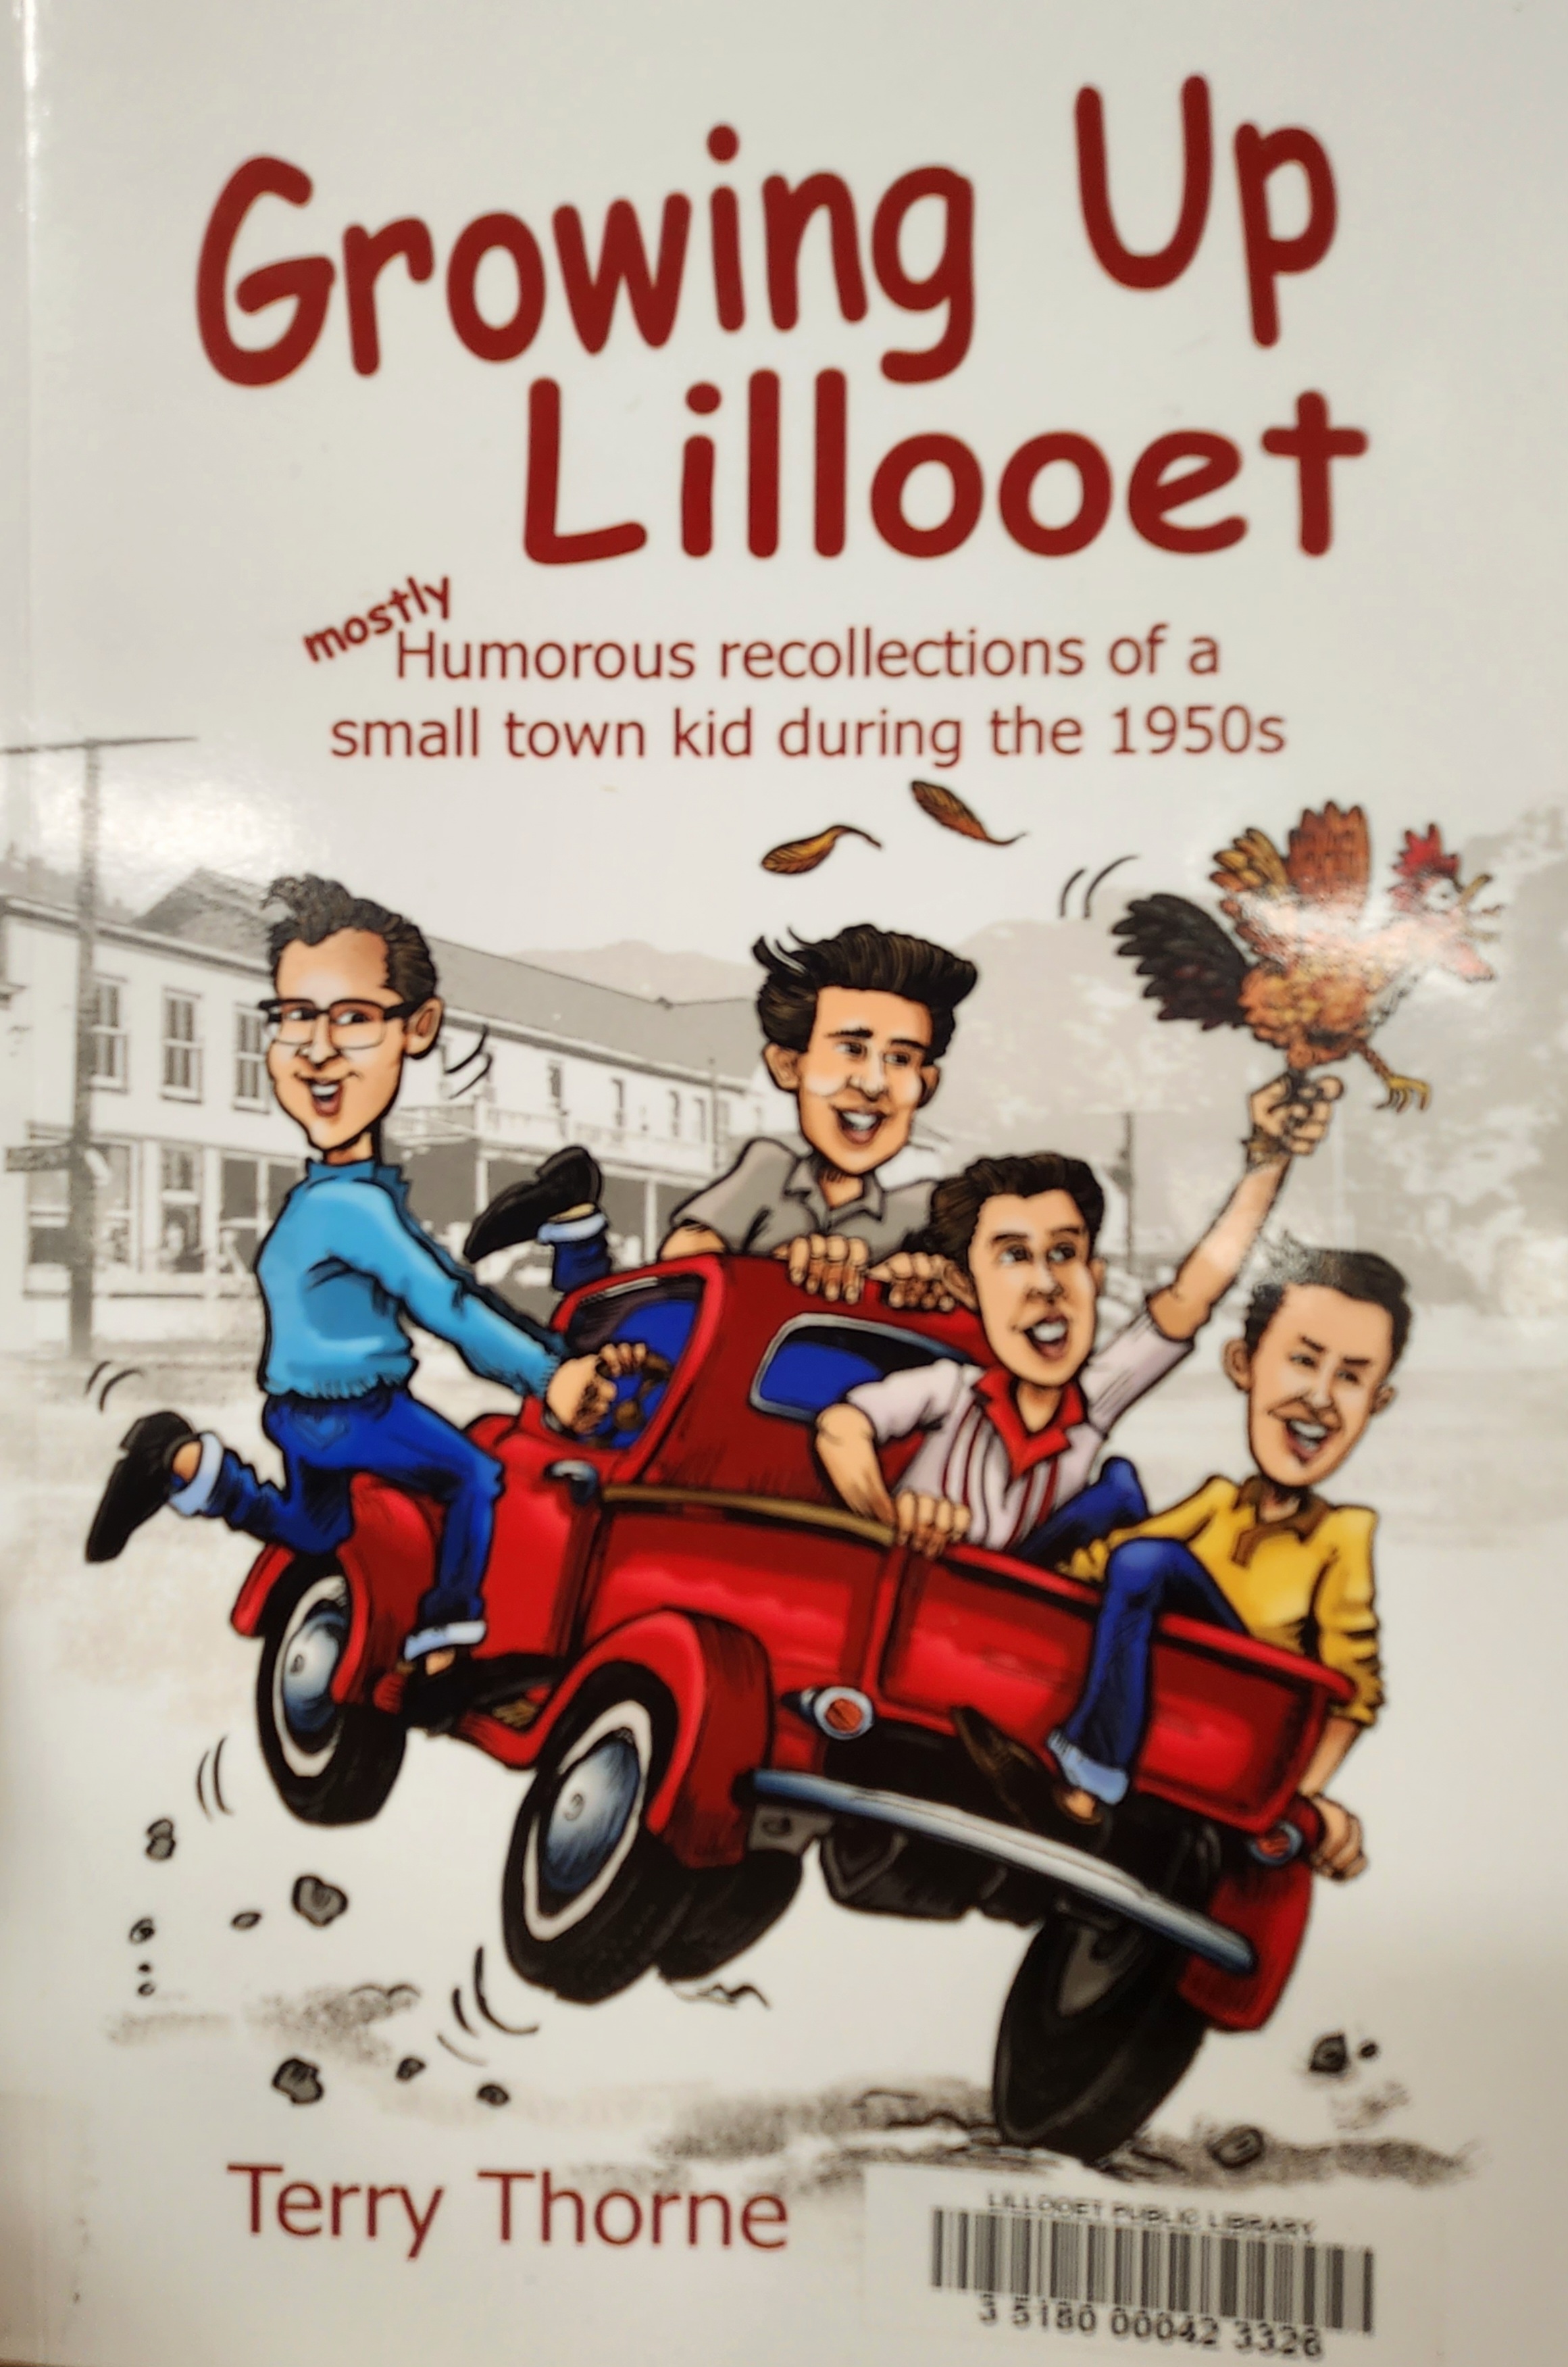 Book Cover - growing up in Lillooet